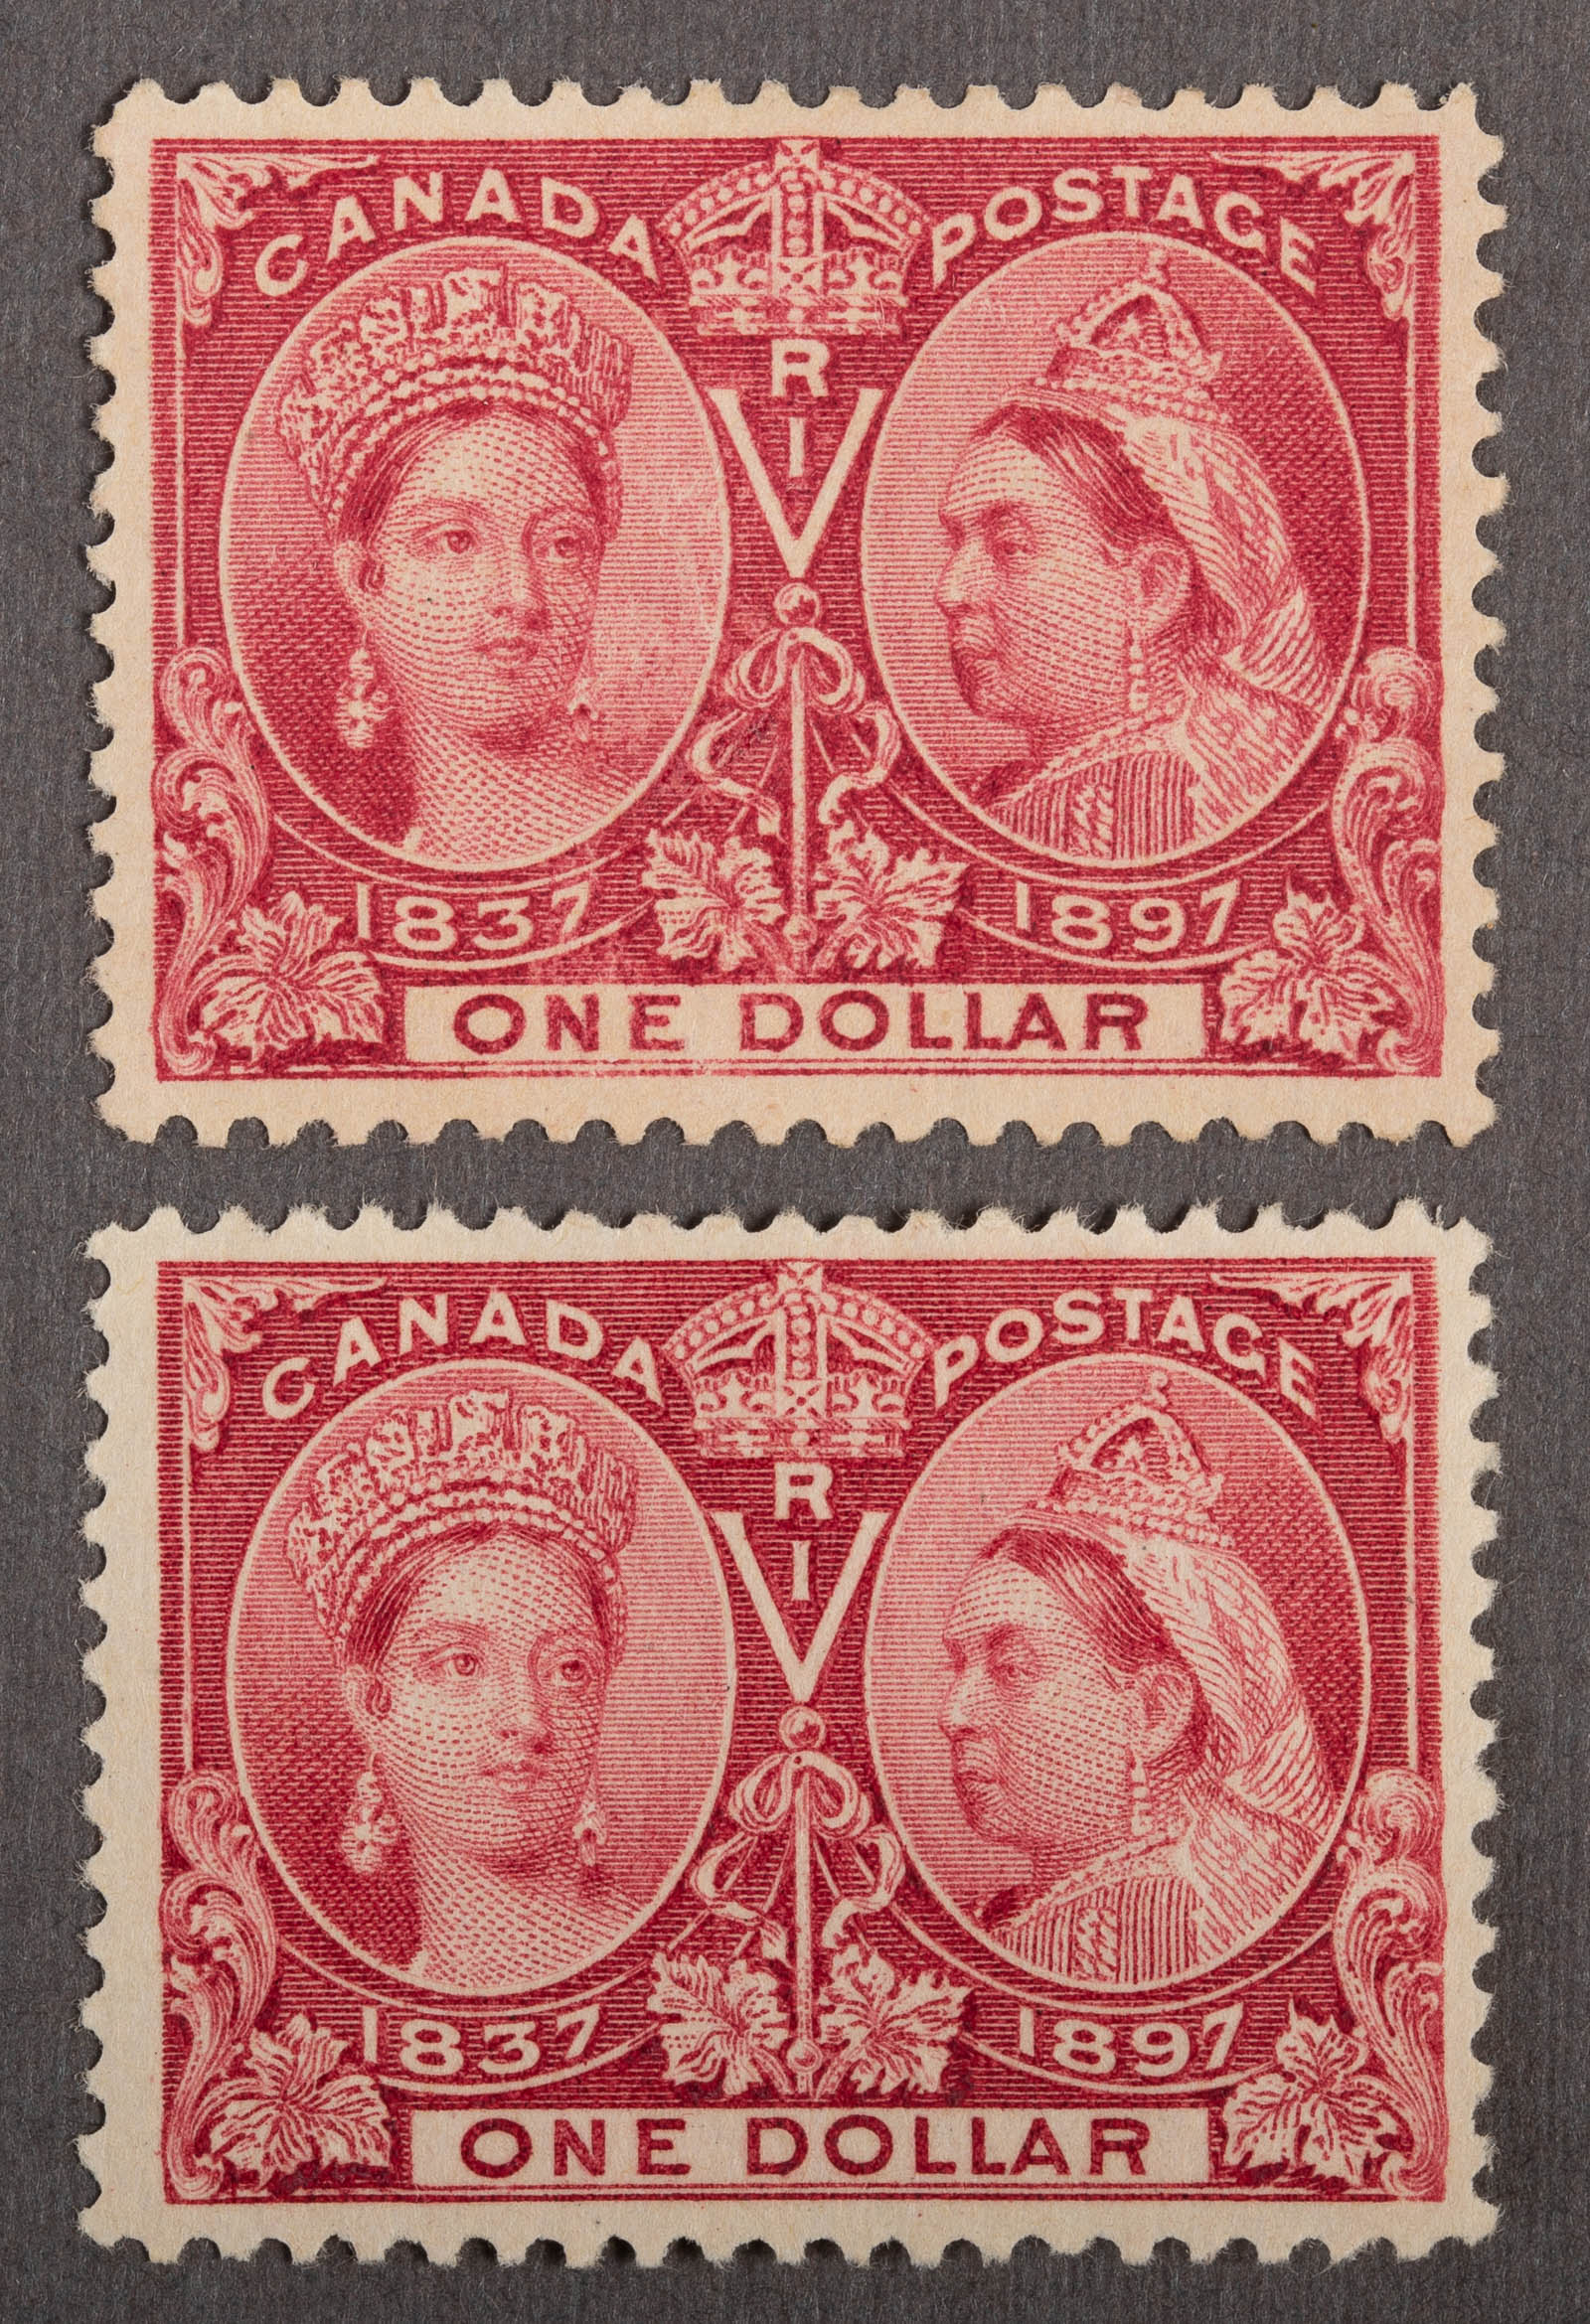 CANADA POSTAGE STAMPS TWO EXAMPLES 338a07